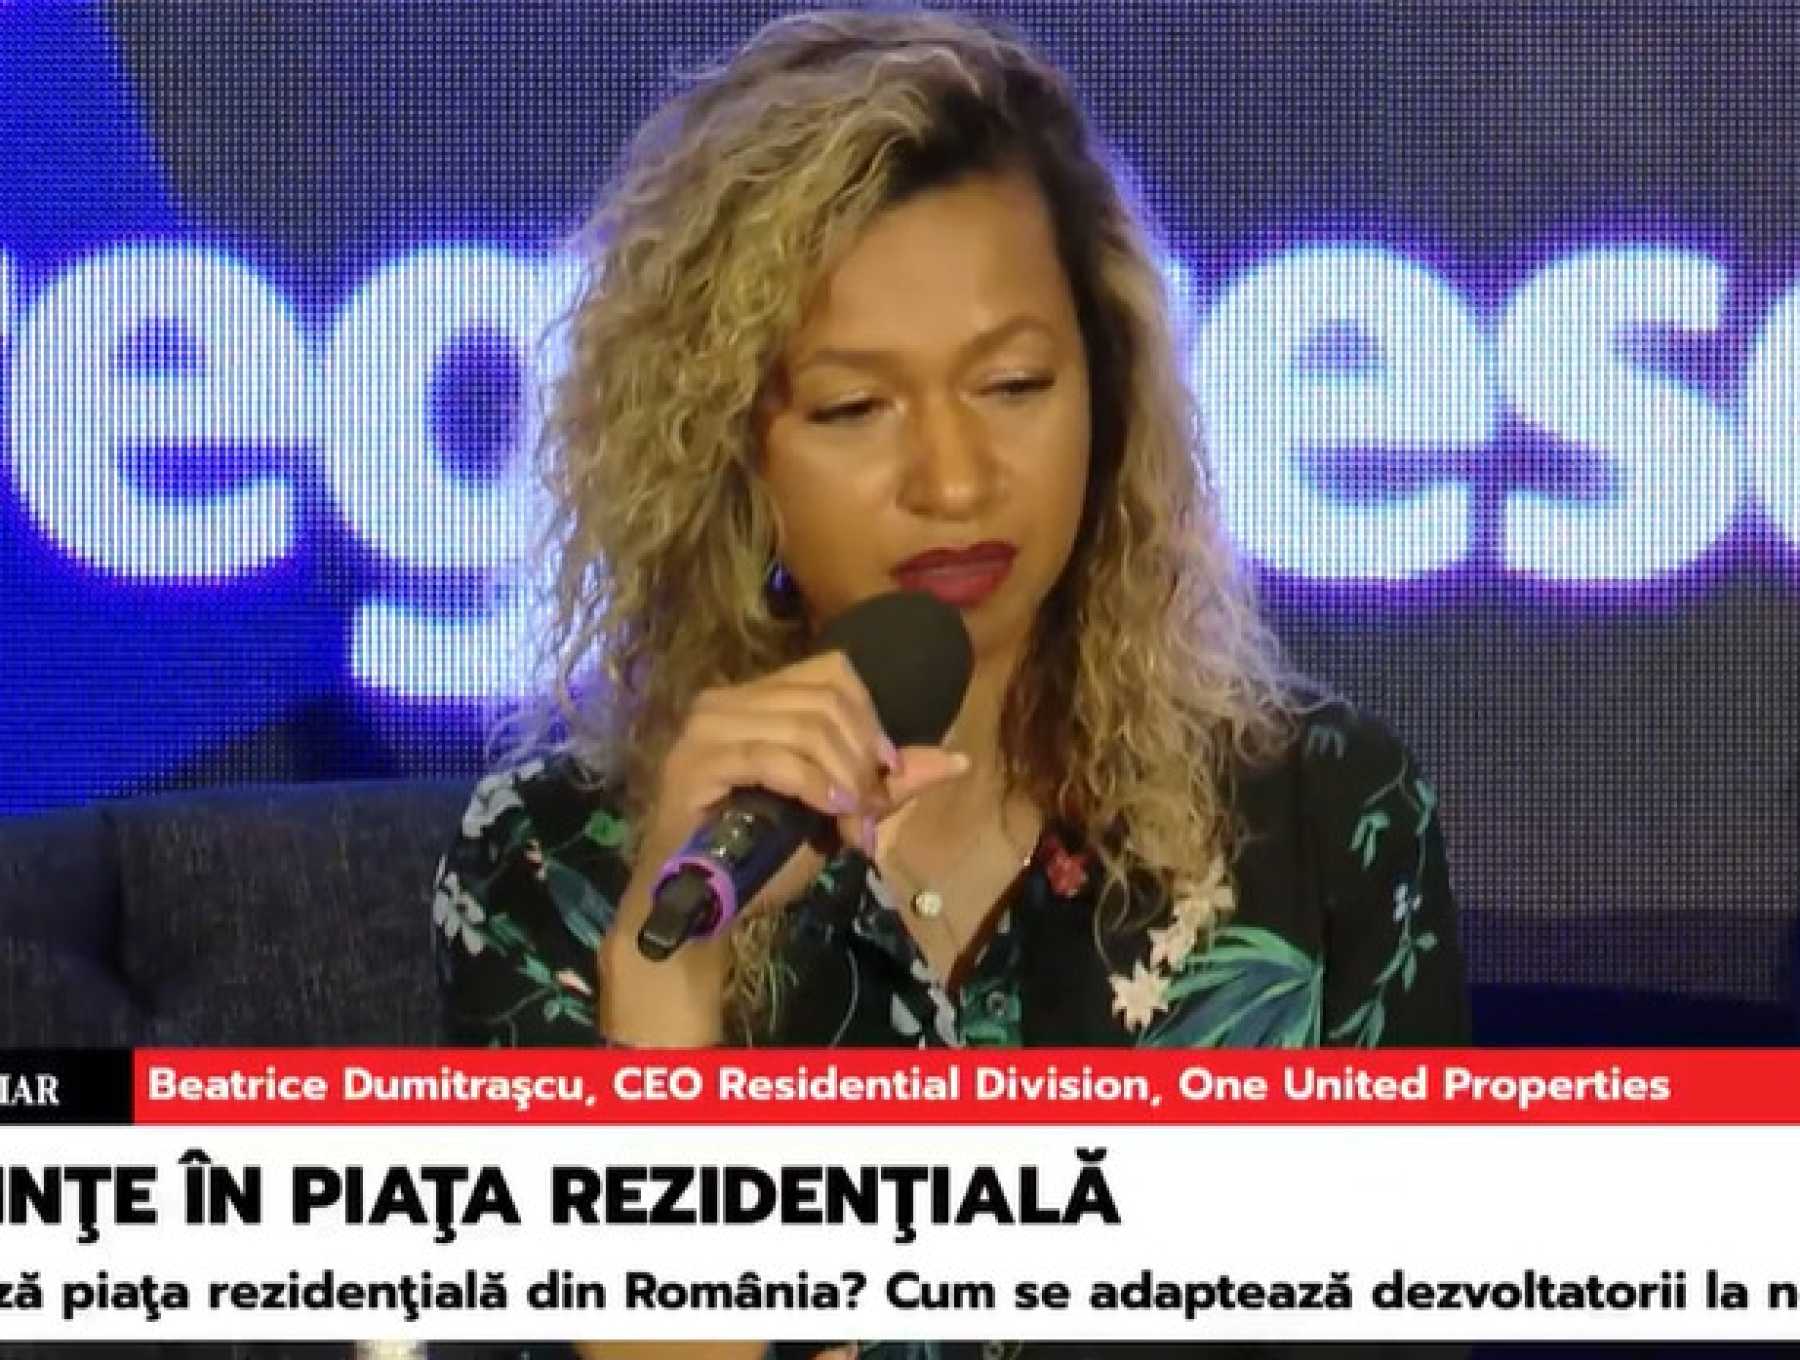 Beatrice Dumitrașcu, CEO Residential Division One United Properties, speaker at the ZF conference "Trends in the residential market"